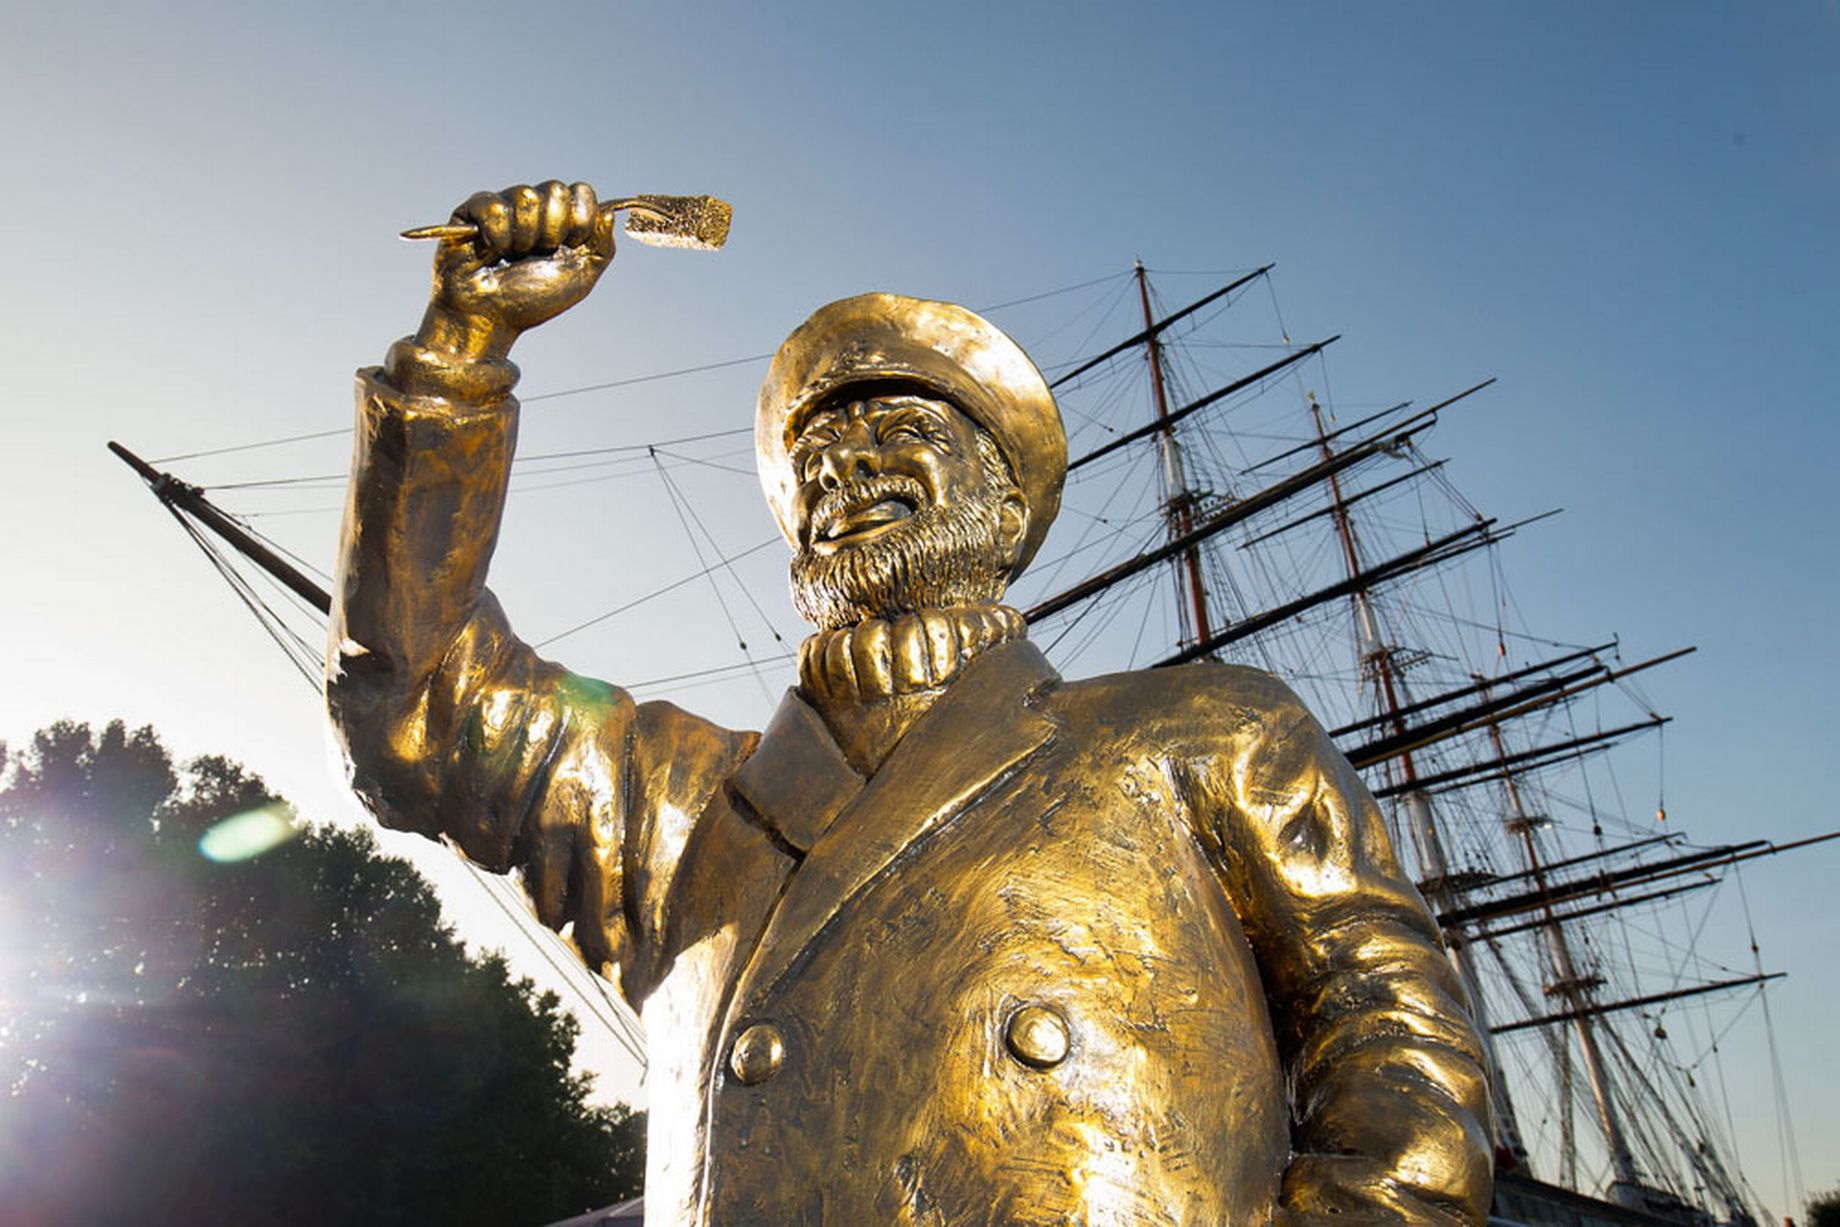 Seven-foot golden statue of a famous sea captain unveiled - Mirror ...